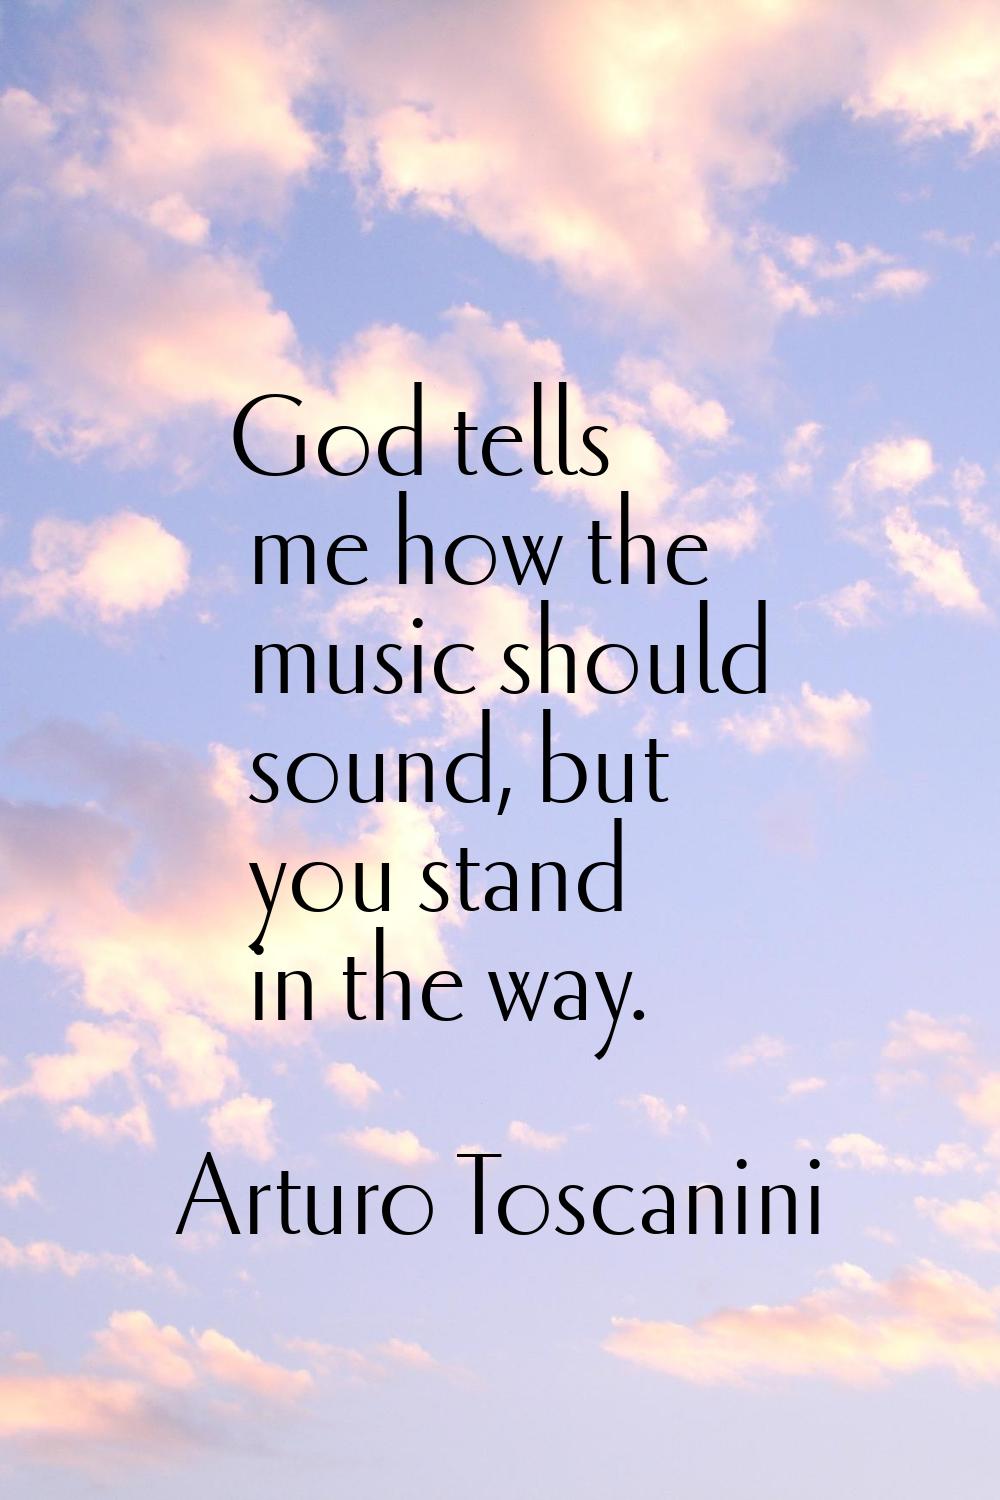 God tells me how the music should sound, but you stand in the way.